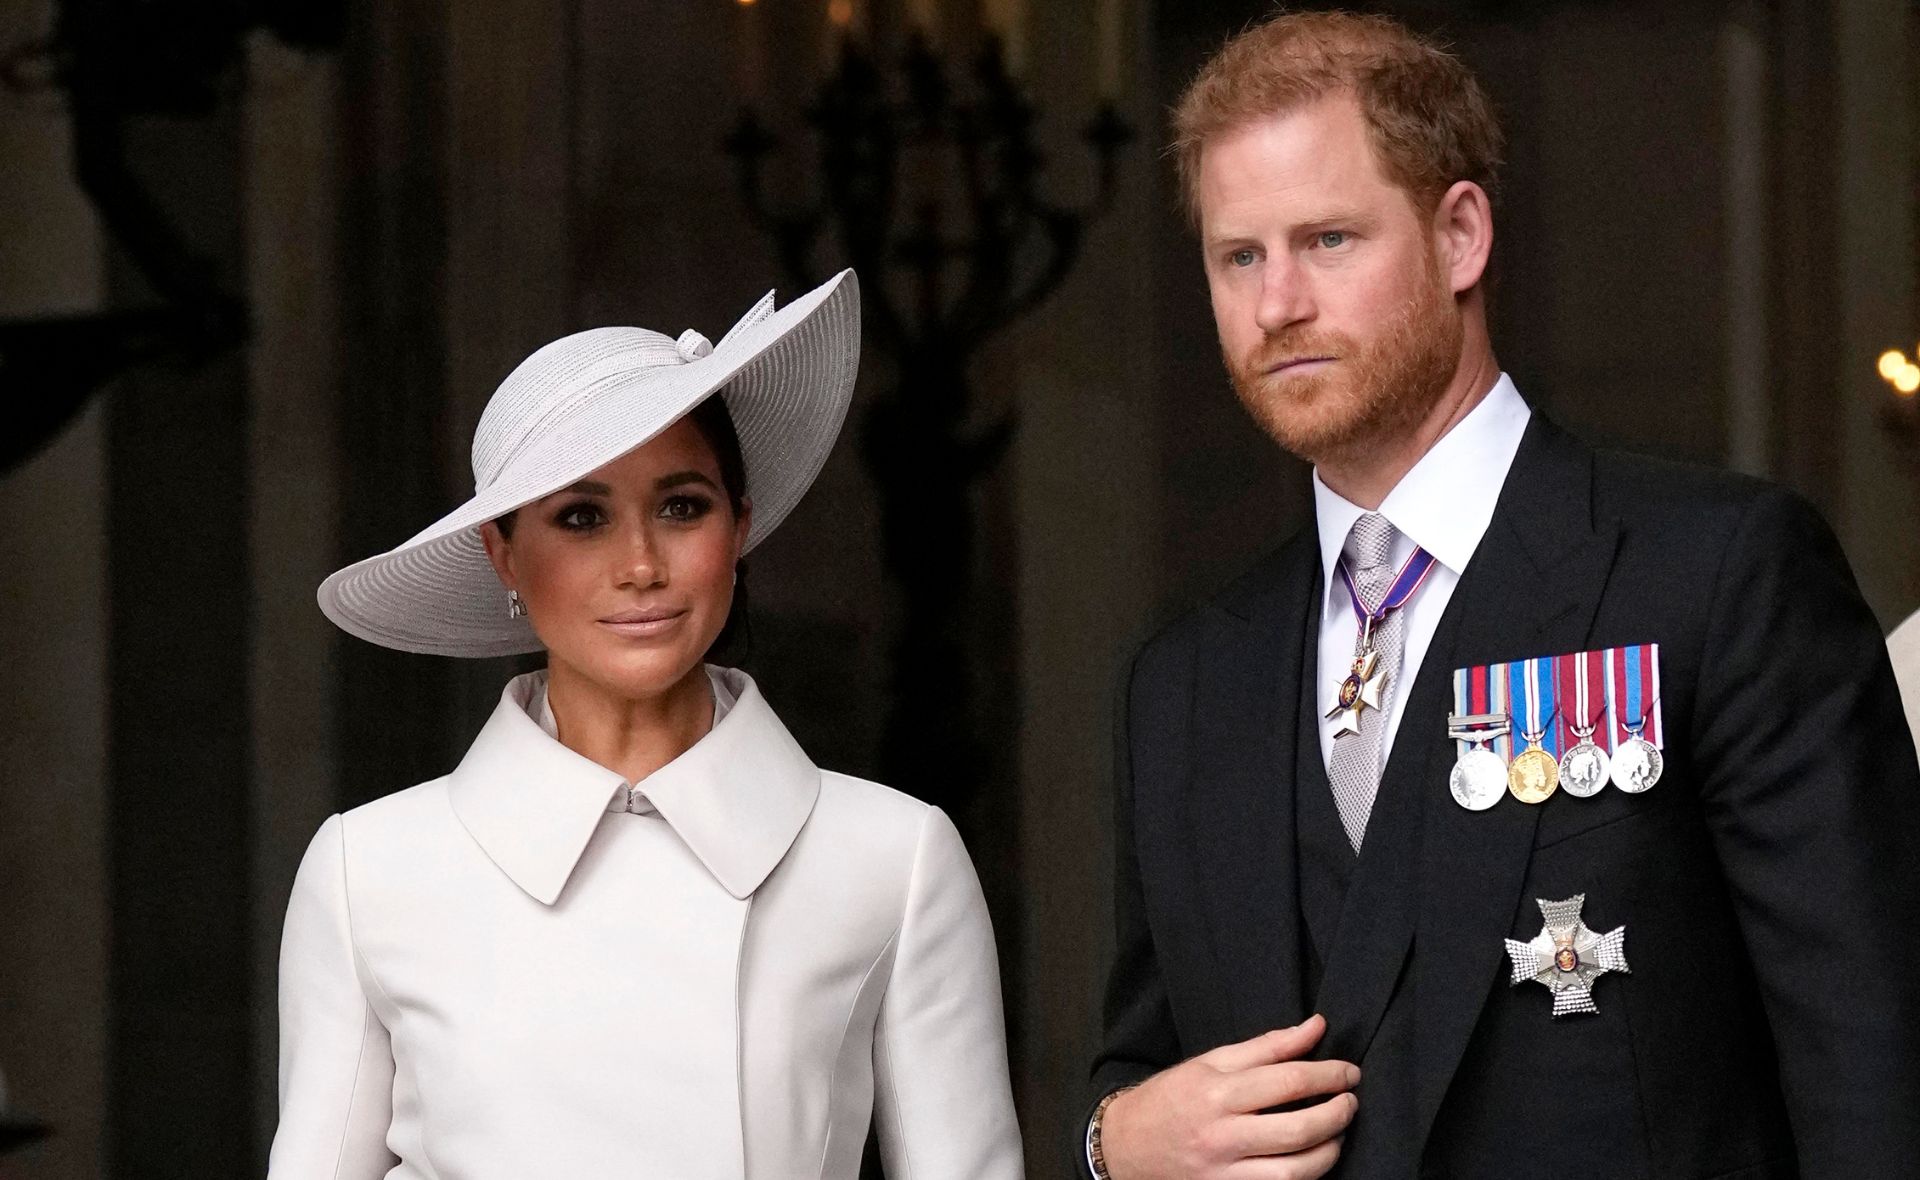 Shock claims Prince Harry regrets his marriage to Meghan Markle after he was ‘backed into a corner’